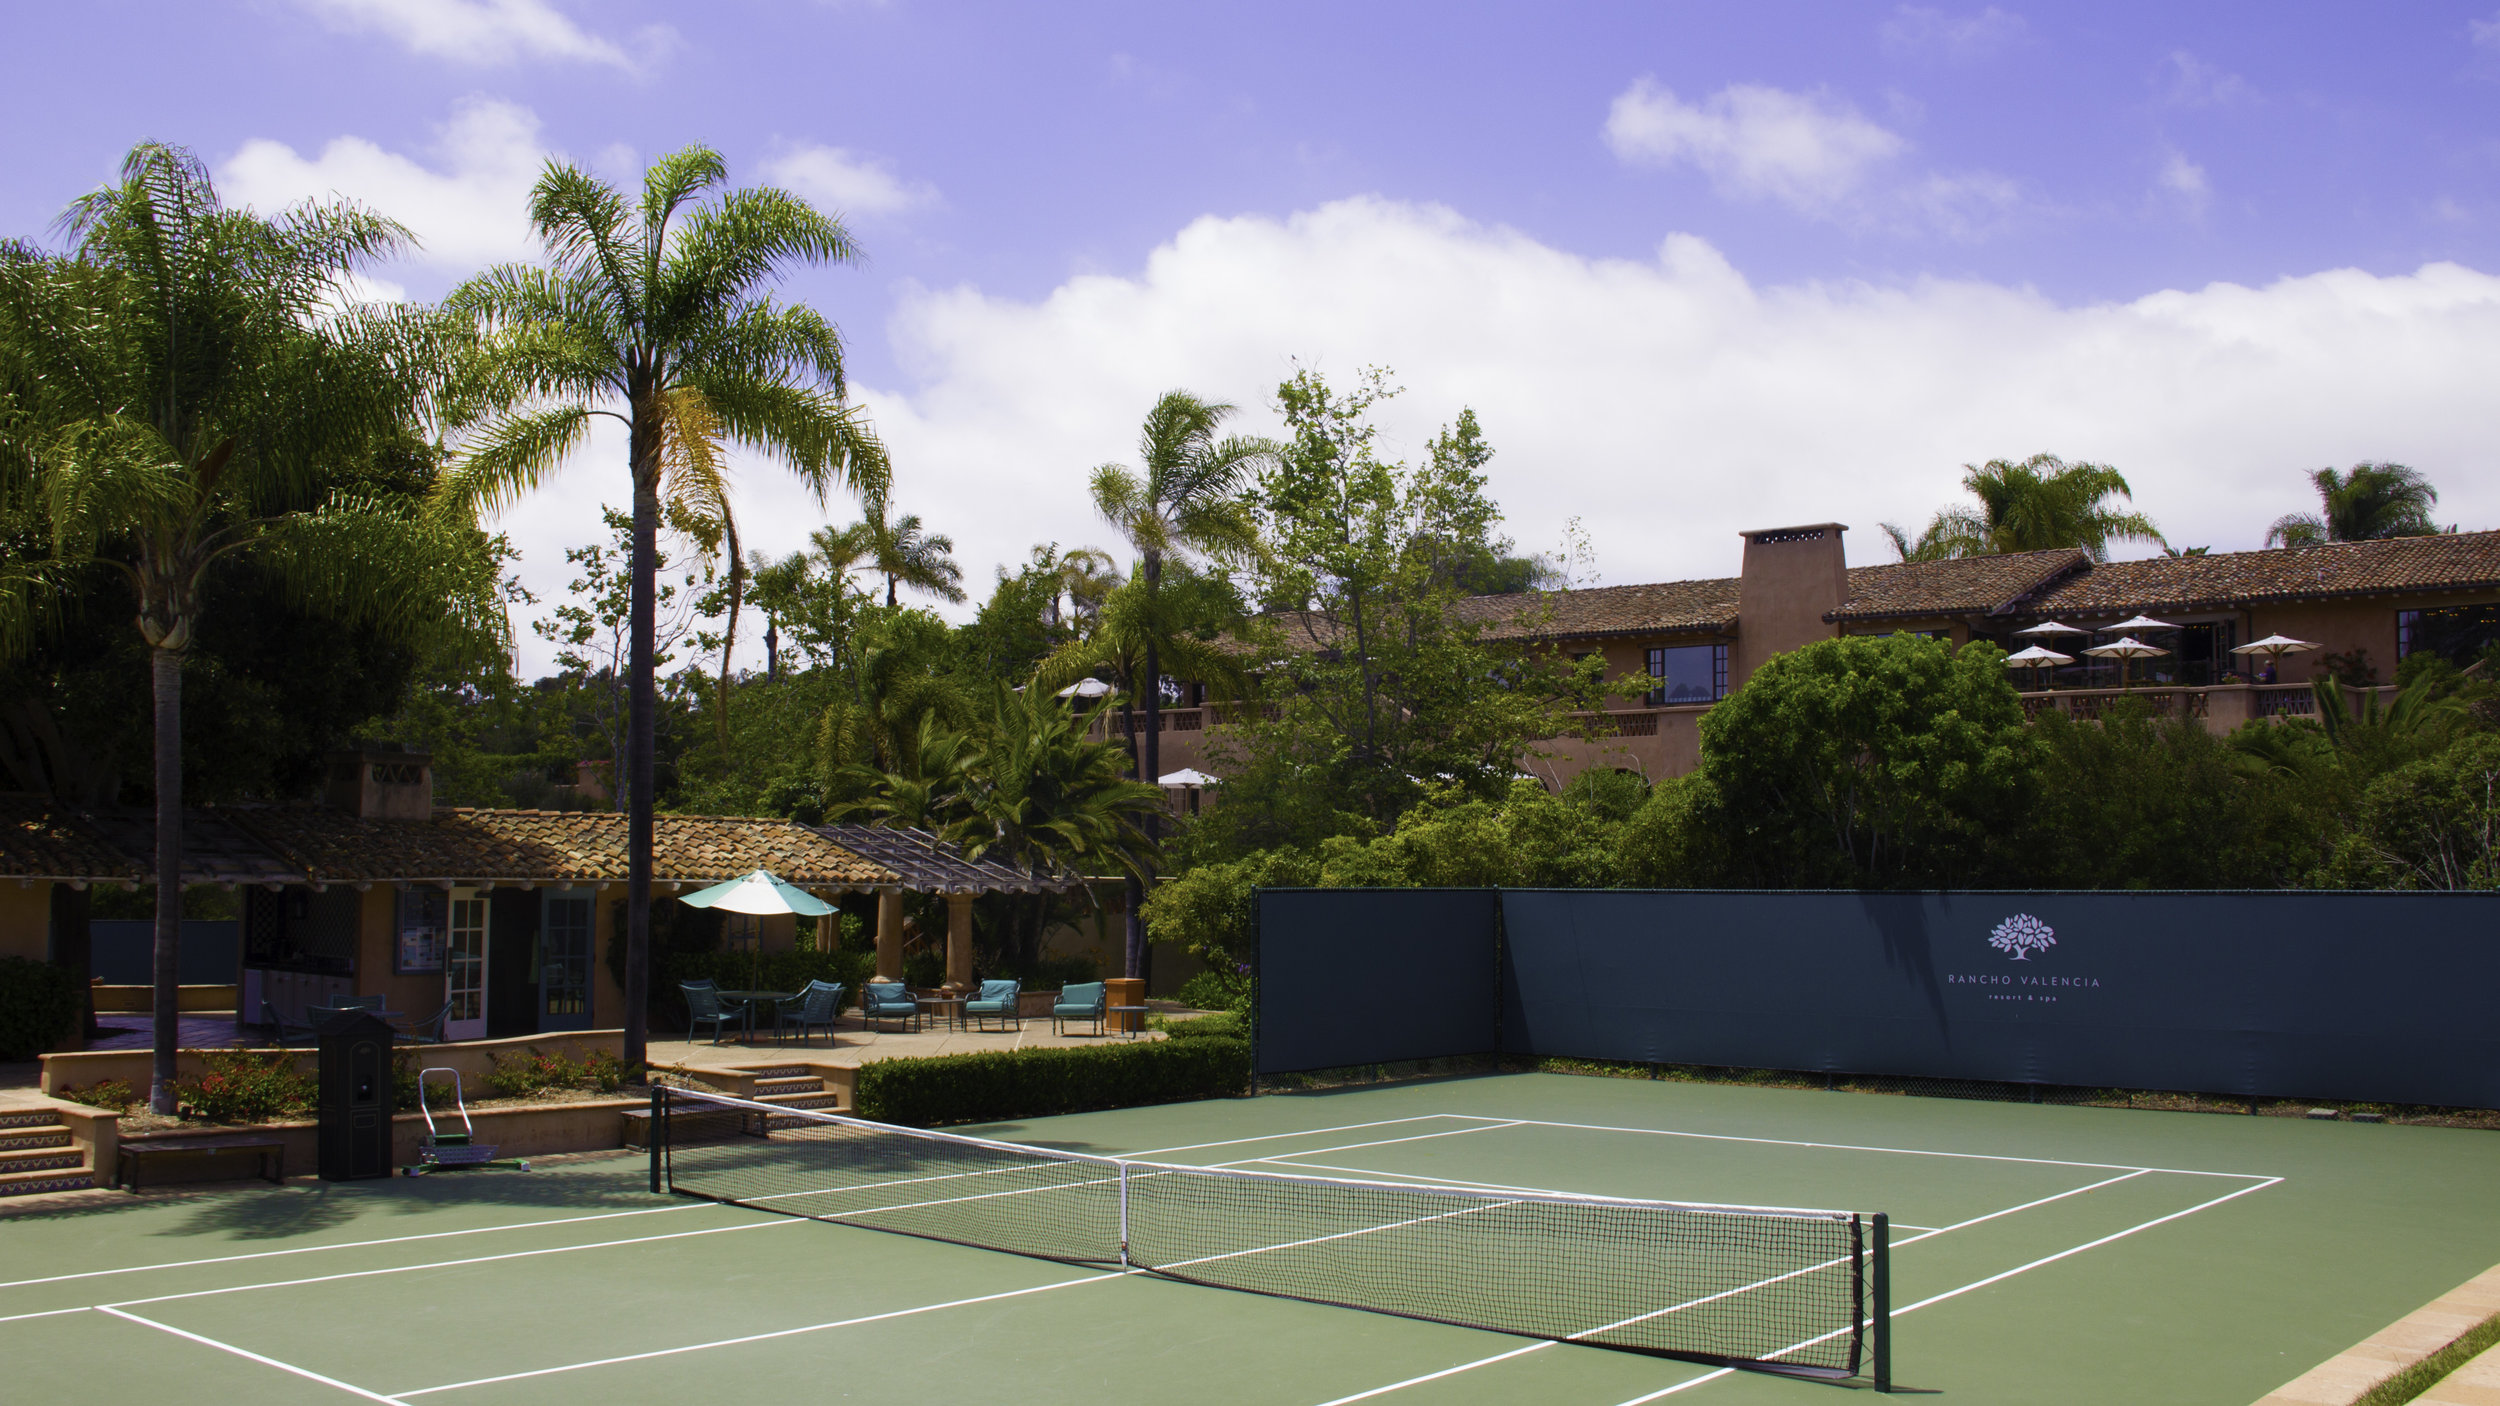 San Diego Hotels With Tennis Courts — Local Wallys Guide to San Diego